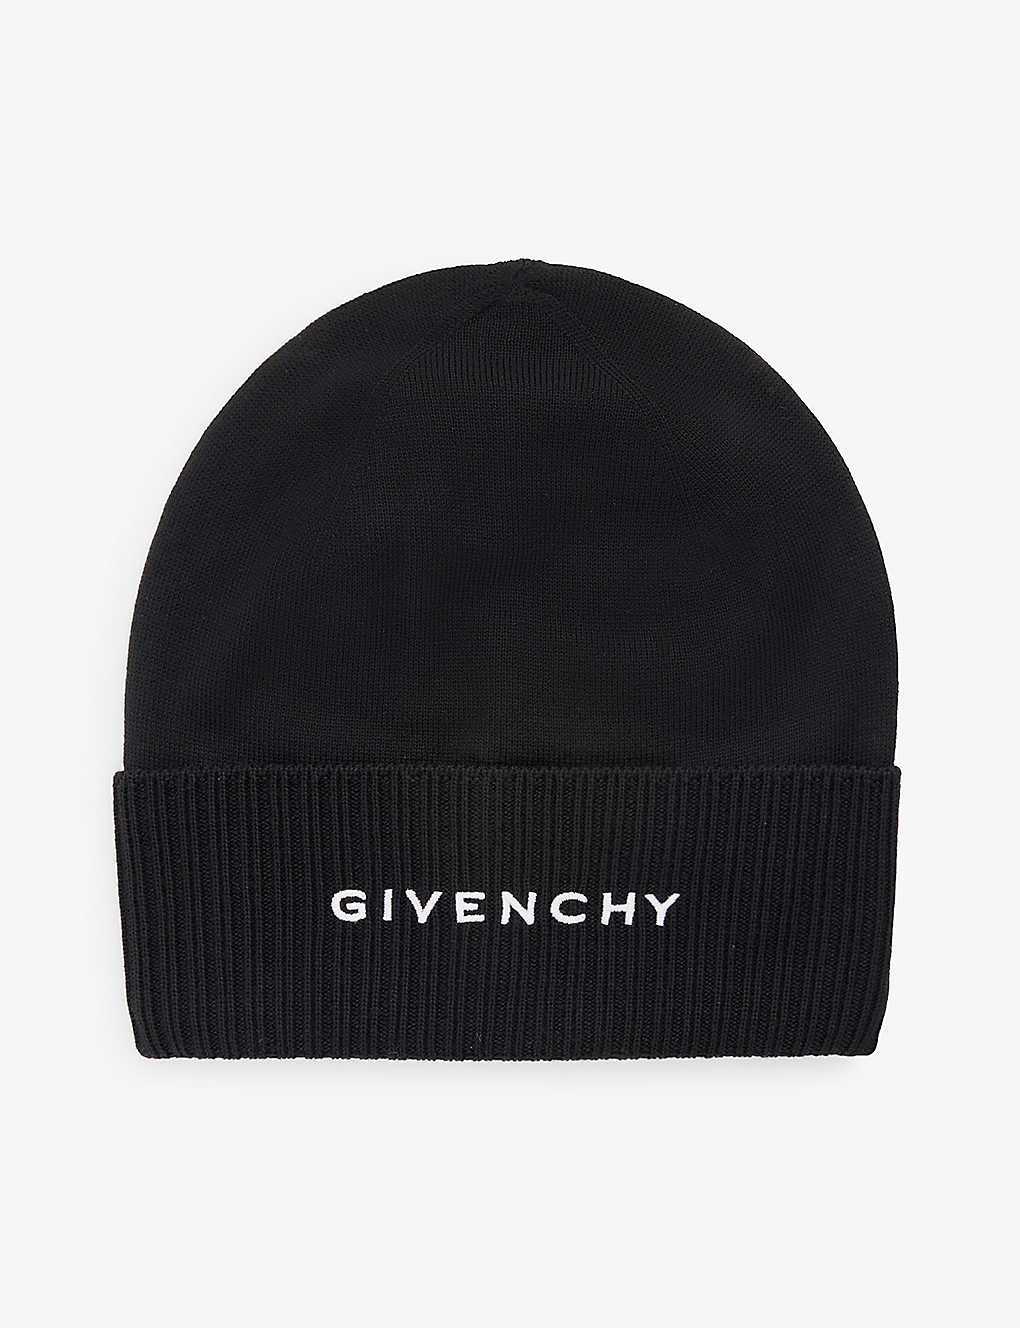 GIVENCHY GIVENCHY WOMEN'S BLACK/ WHITE LOGO-EMBROIDERED WOOL-KNIT BEANIE,65611198